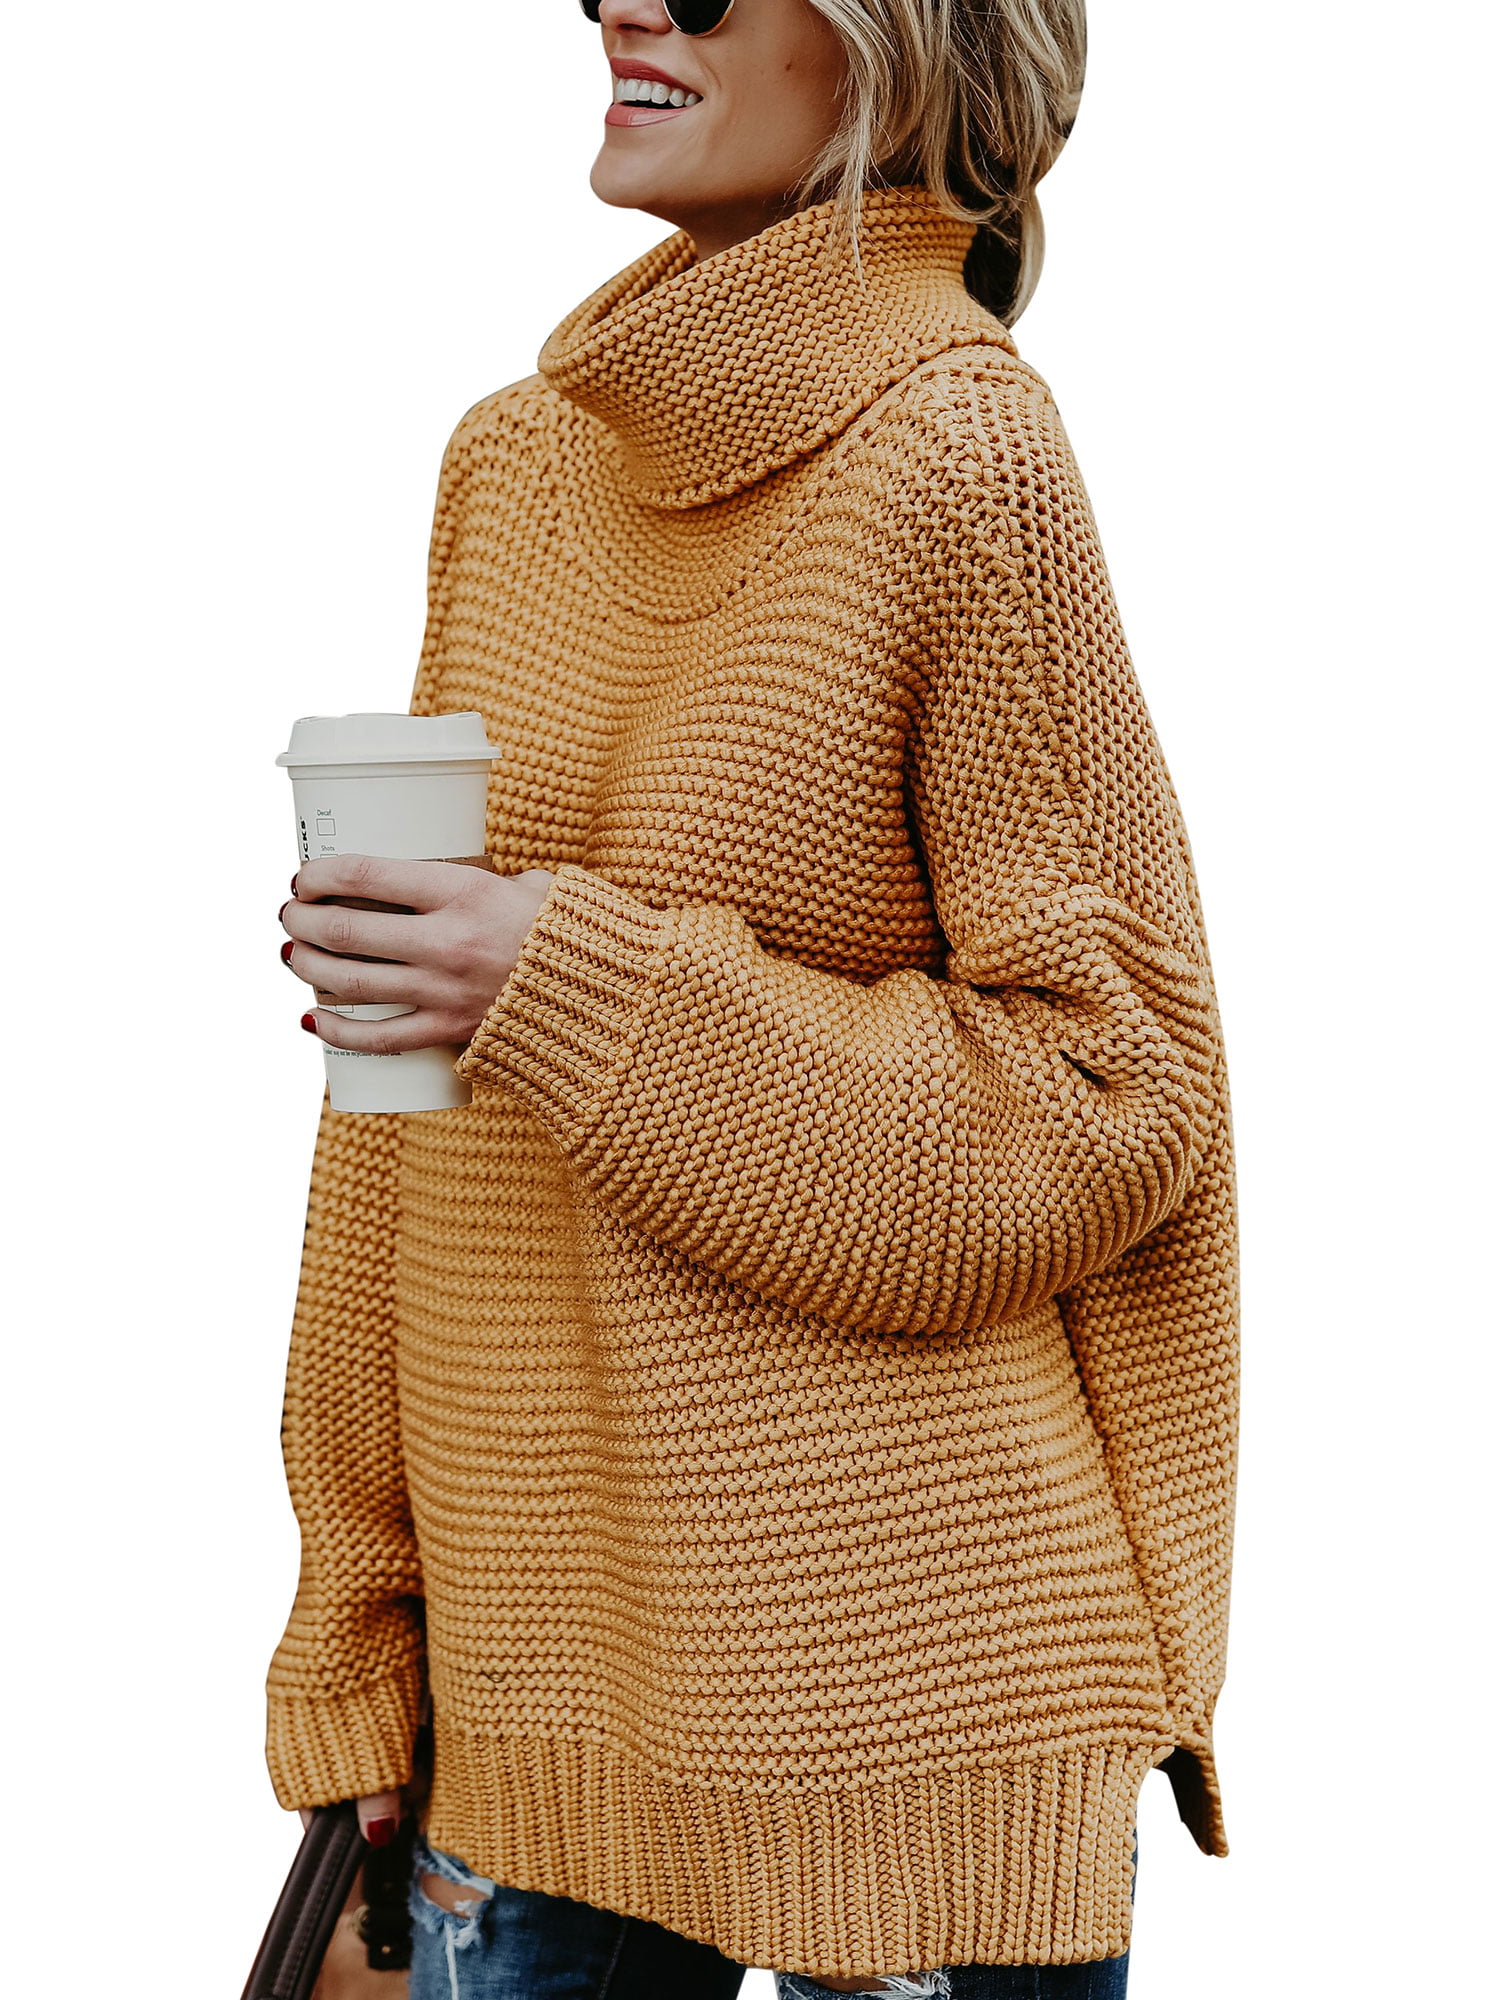 Womens Coat Turtleneck Loose Fit Sweet Warm Winter Sweater Pullover New